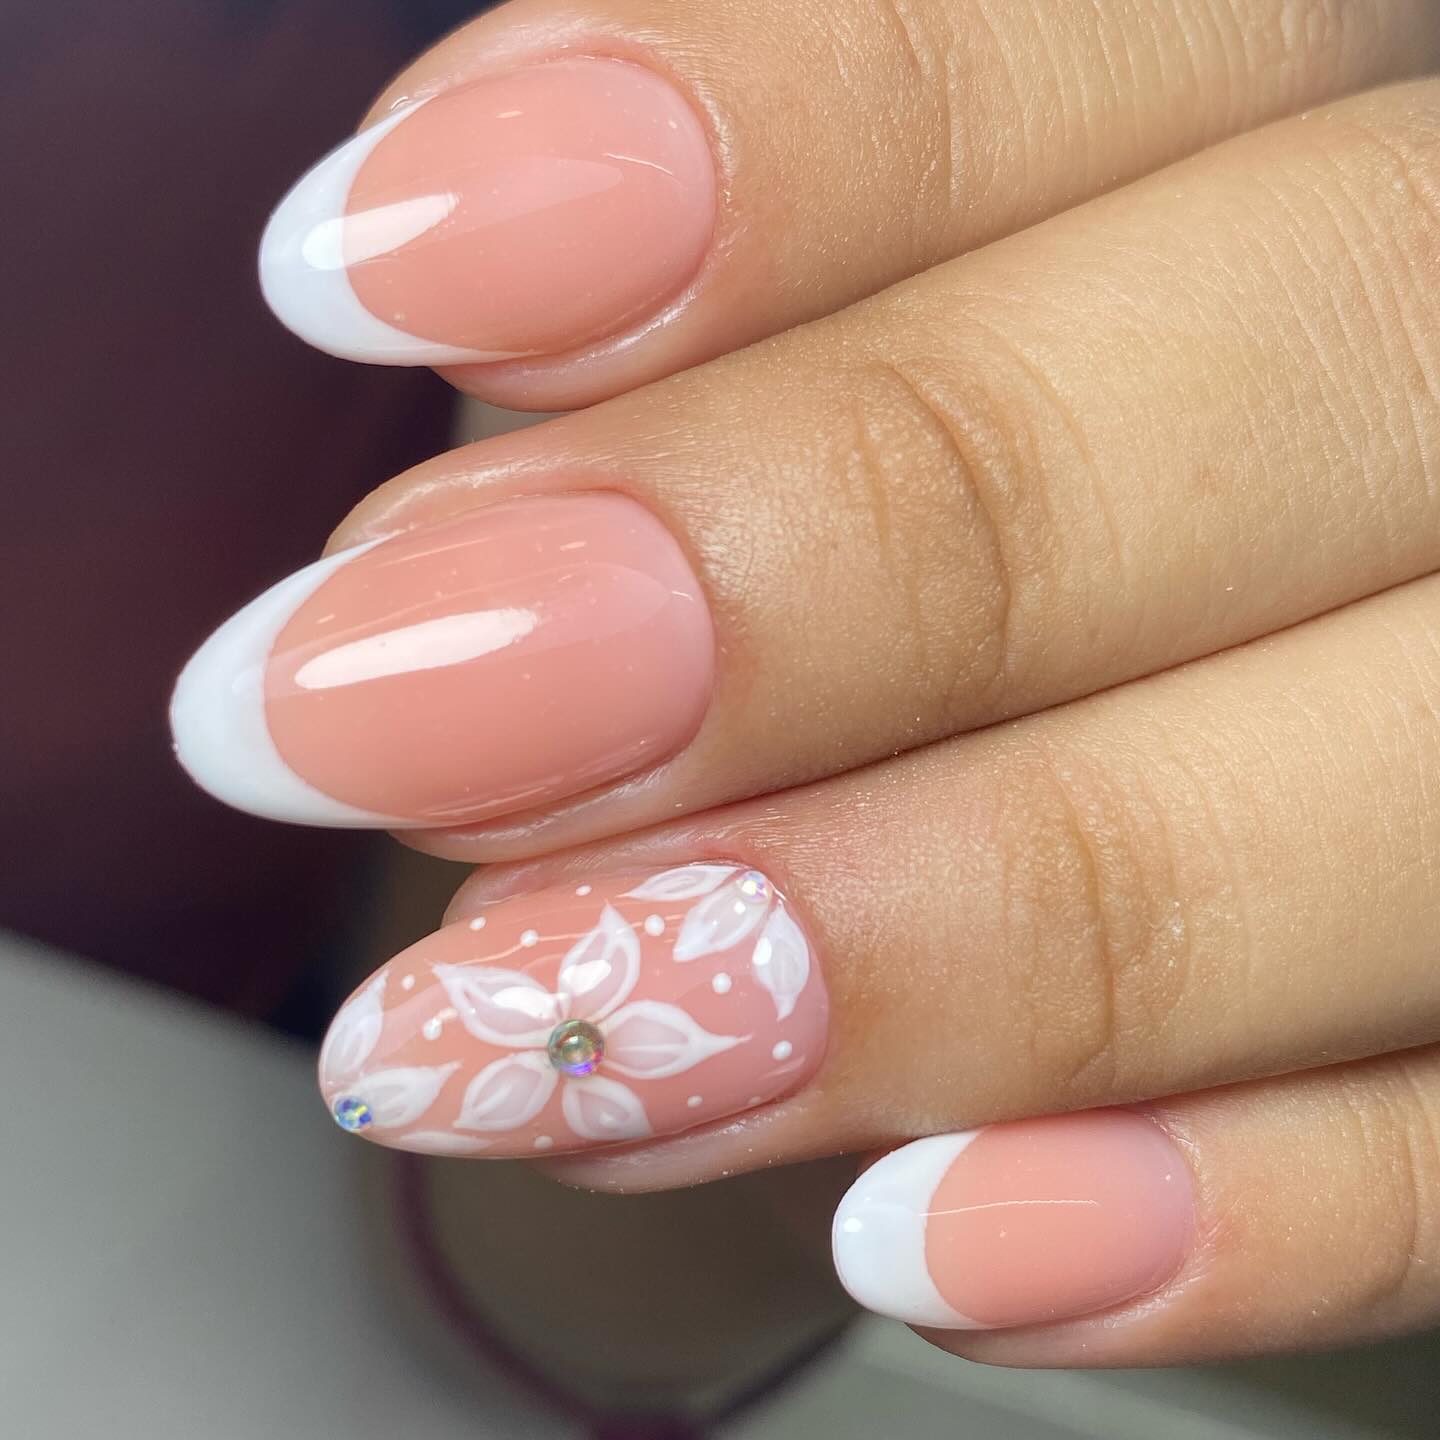 100 Of The Best Spring Inspired Nail Designs images 98